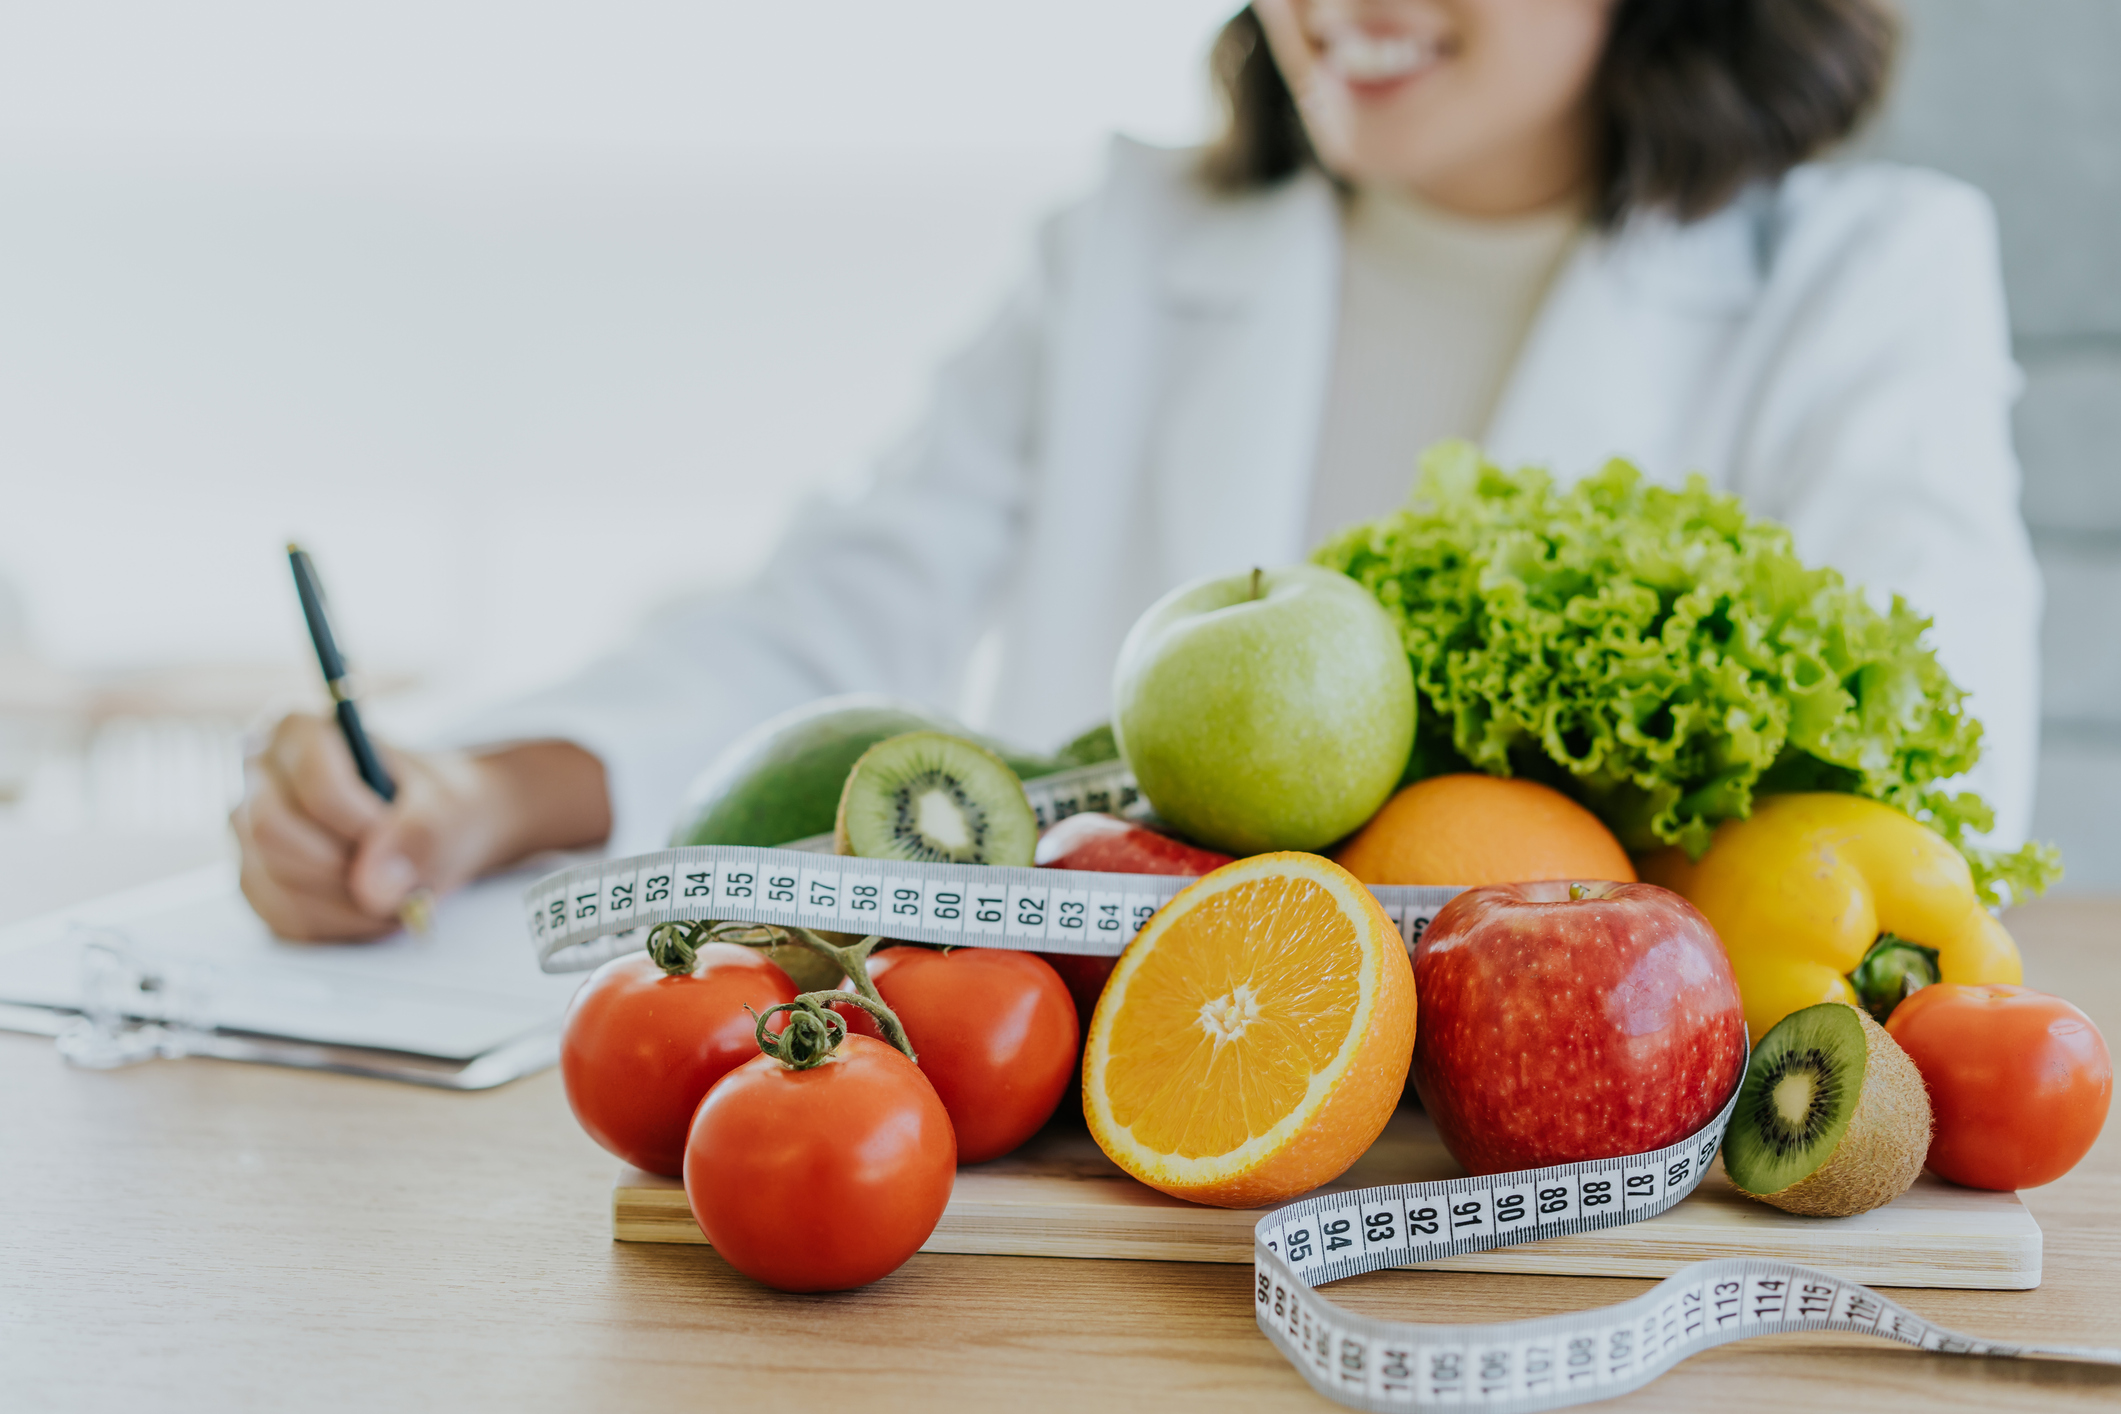 Seven Questions for a Dietitian